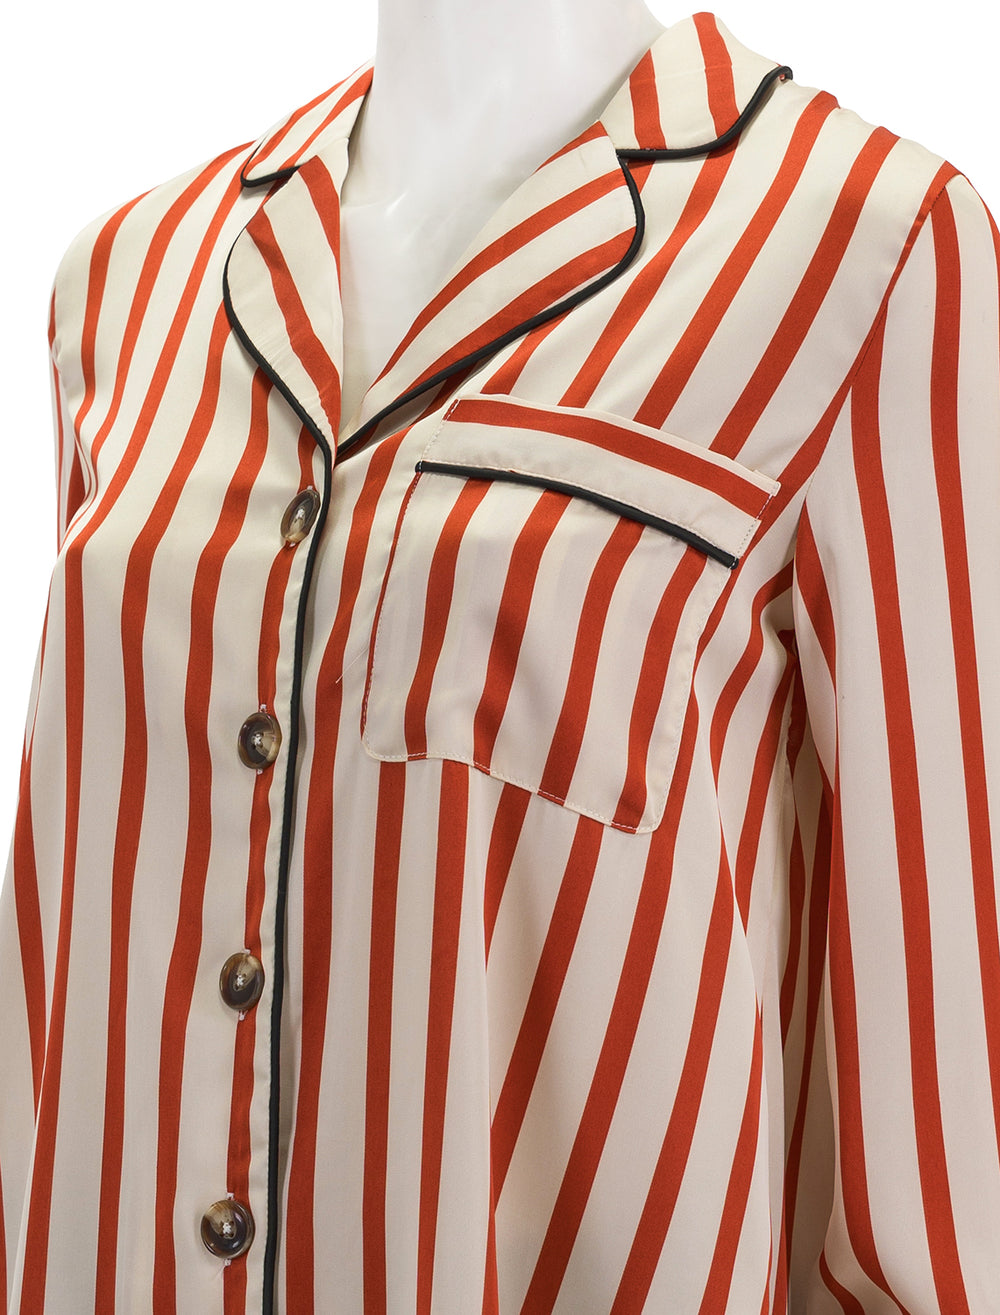 Close-up view of English Factory's striped satin shirt with piping.